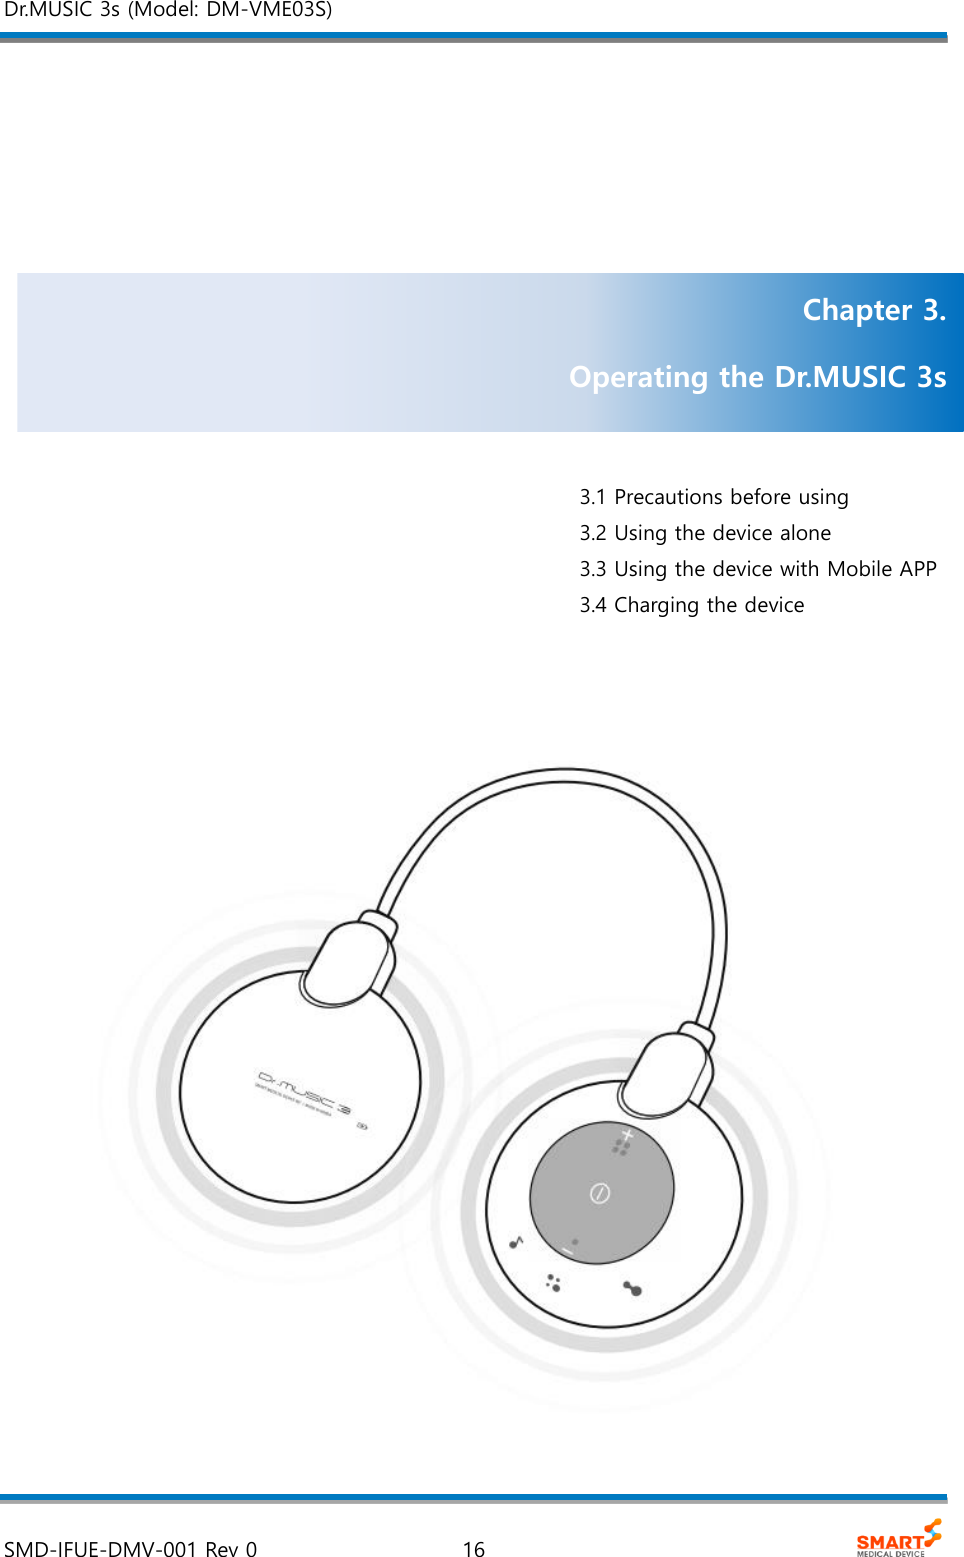 Dr.MUSIC 3s (Model: DM-VME03S)  SMD-IFUE-DMV-001 Rev 0  16          3.1 Precautions before using 3.2 Using the device alone 3.3 Using the device with Mobile APP 3.4 Charging the device     Chapter 3. Operating the Dr.MUSIC 3s  